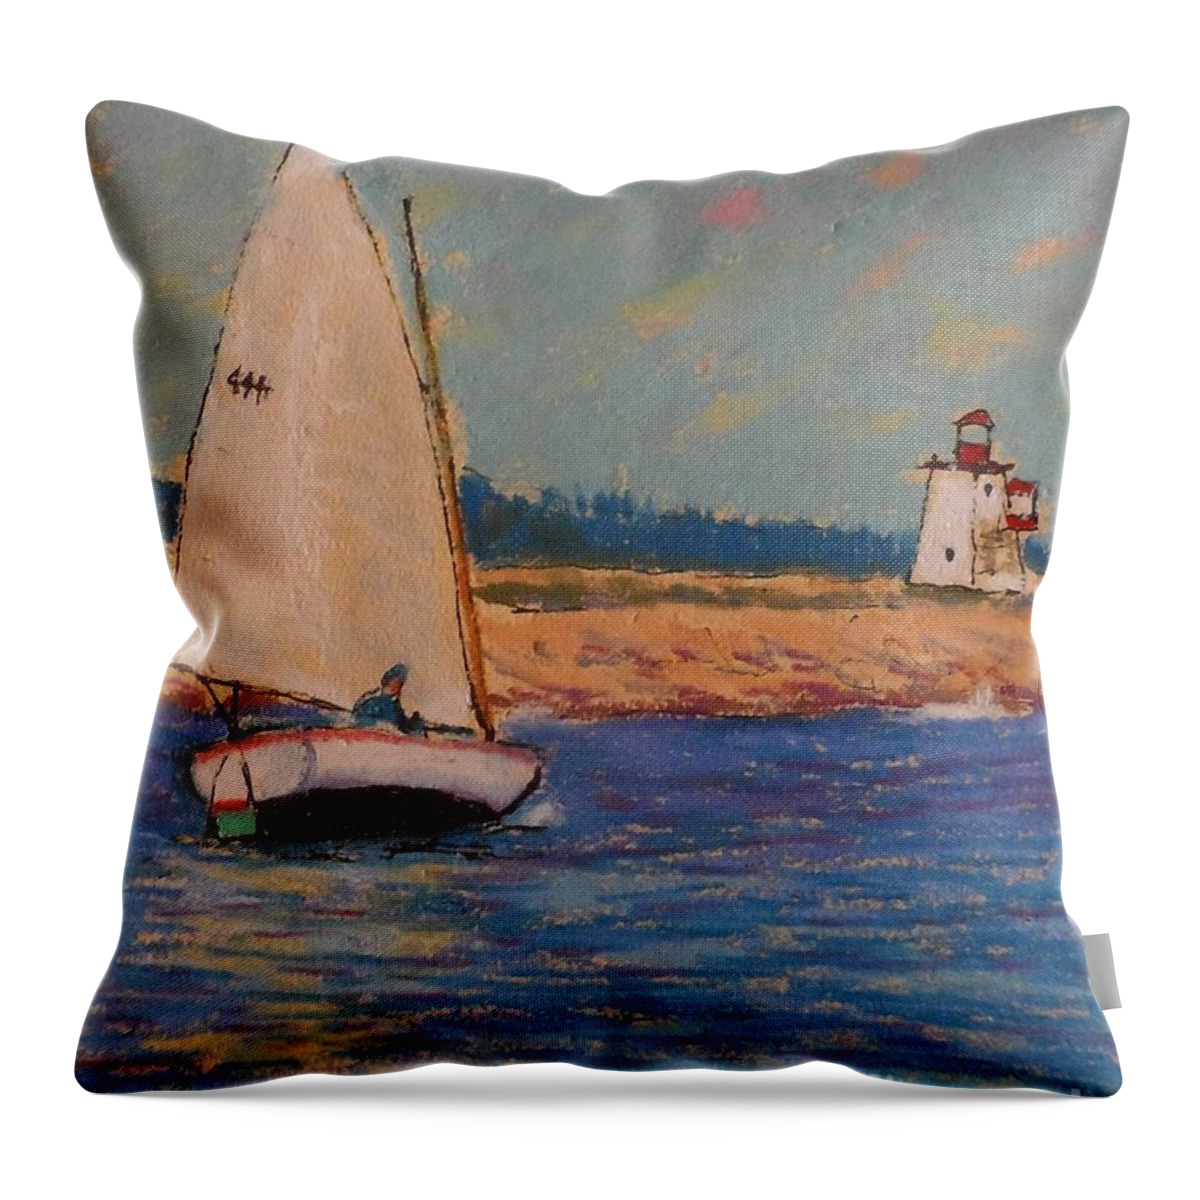 Pastels Throw Pillow featuring the pastel East of Peggy's cove by Rae Smith PAC